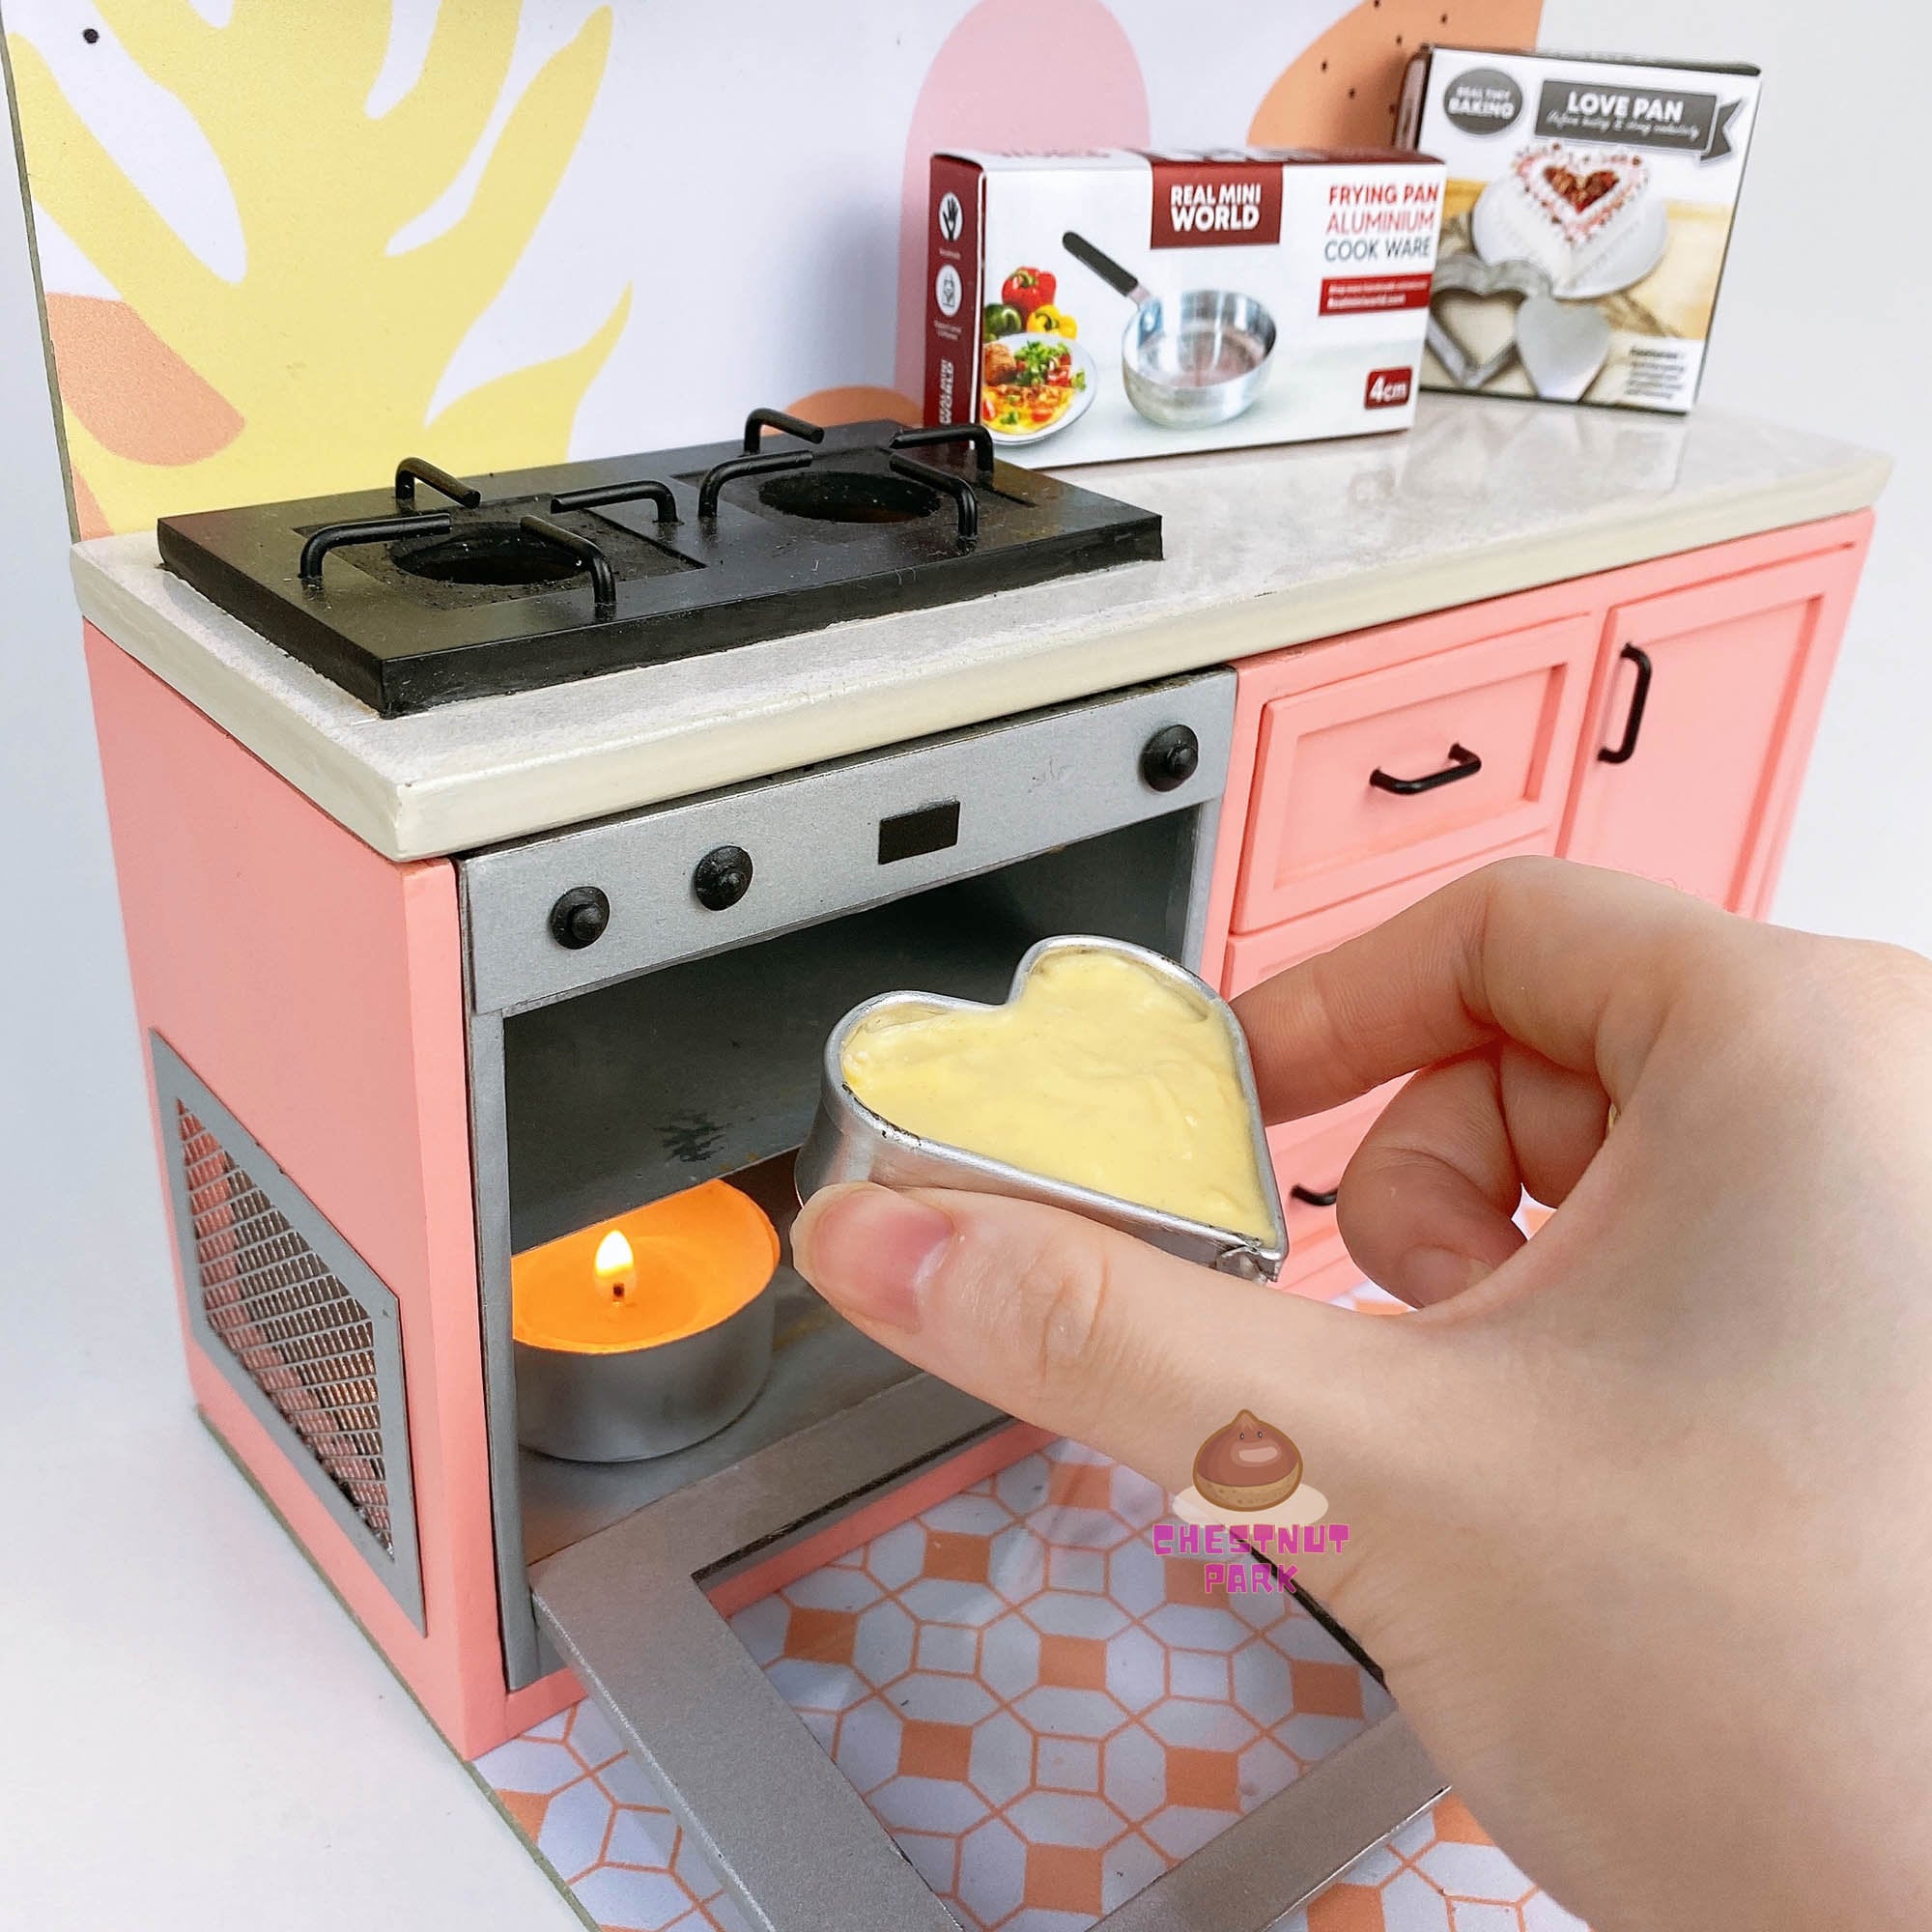 Miniature REAL Baking & Cooking 2in1 Oven Stove Set